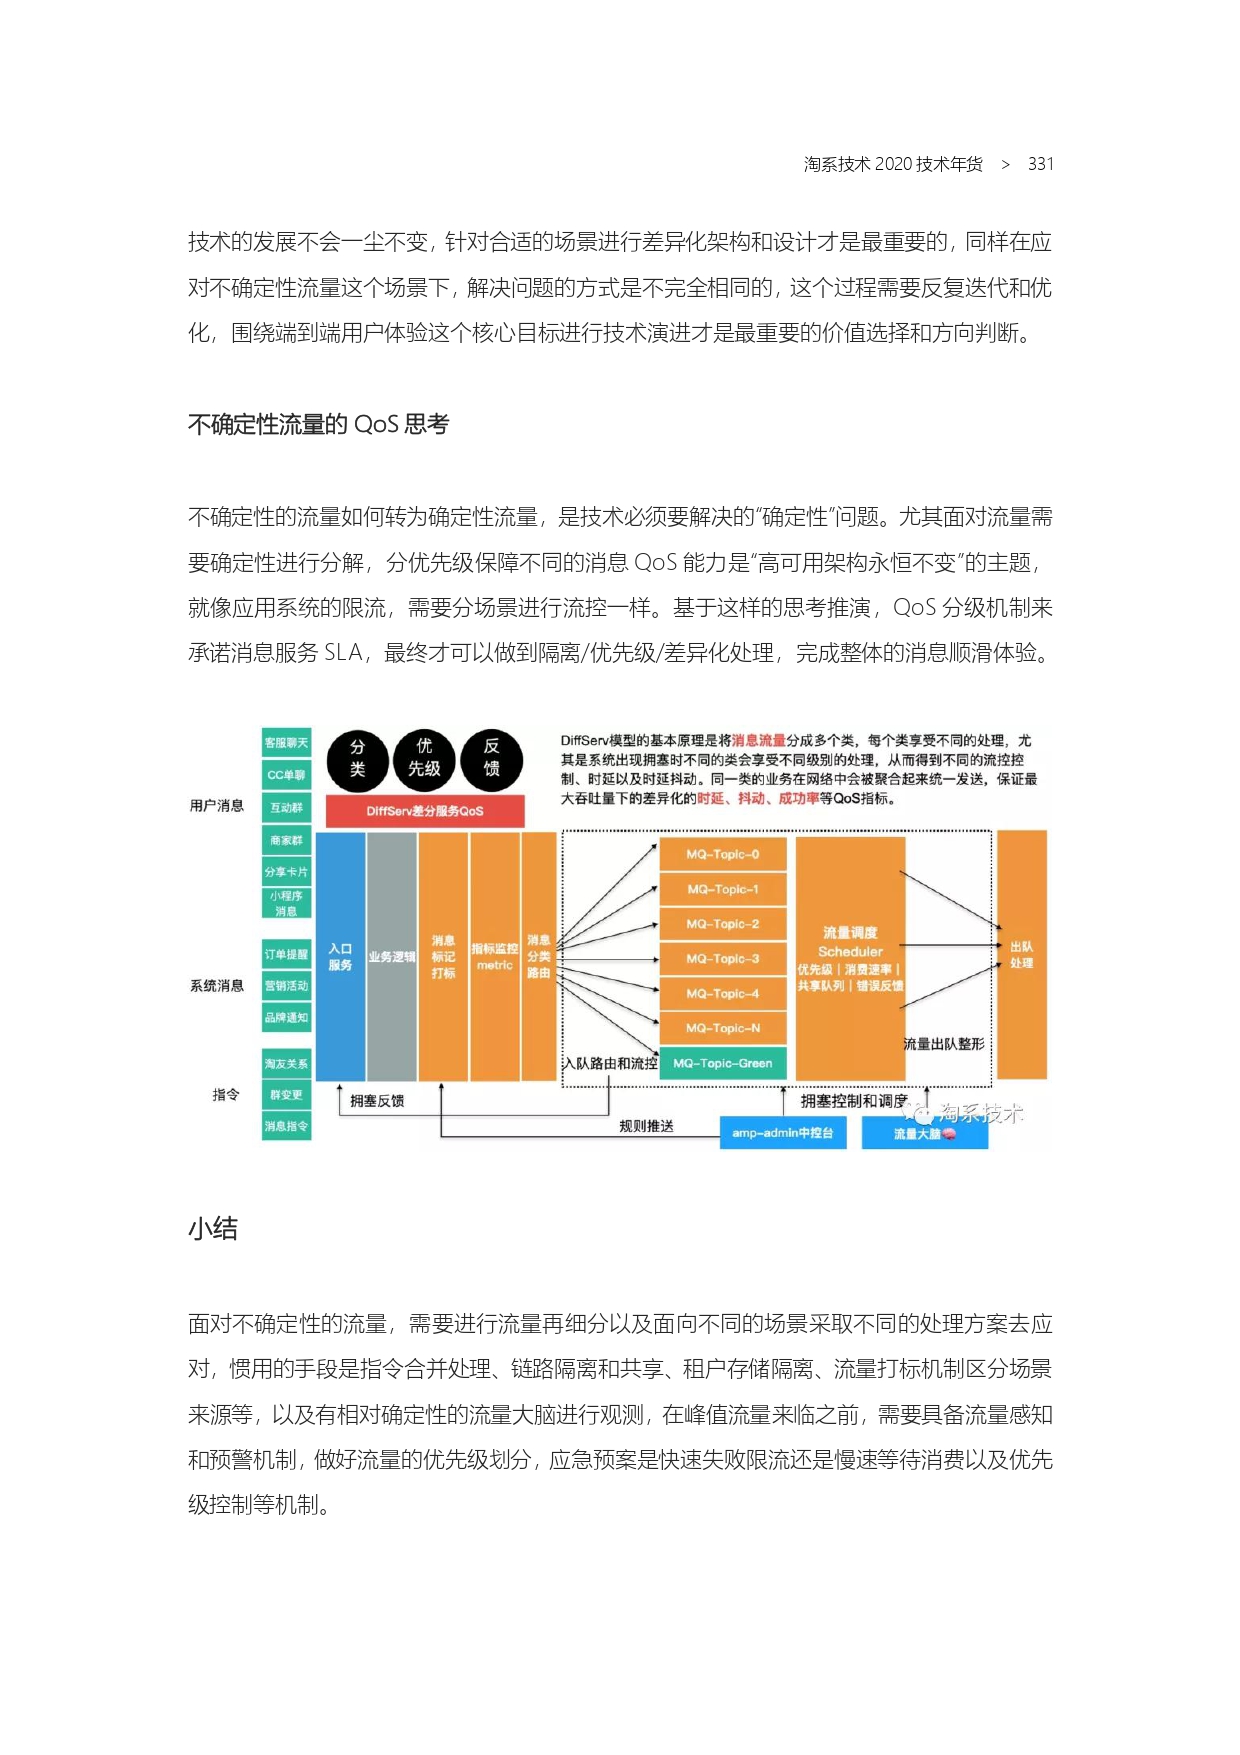 The Complete Works of Tao Technology 2020-1-570_page-0331.jpg